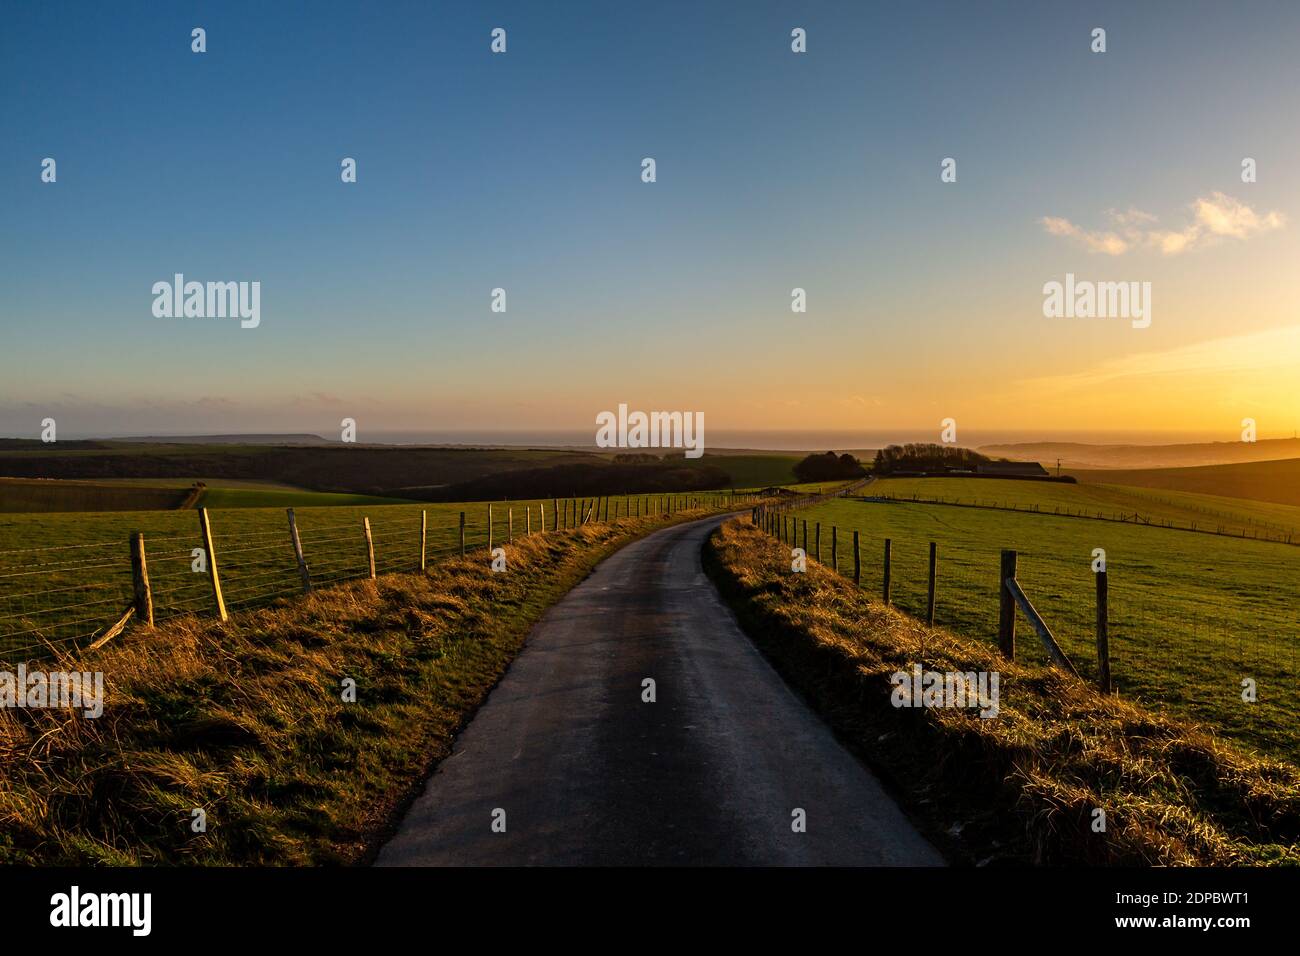 Looking along a country road at Firle Beacon, with a sunset sky ahead Stock Photo